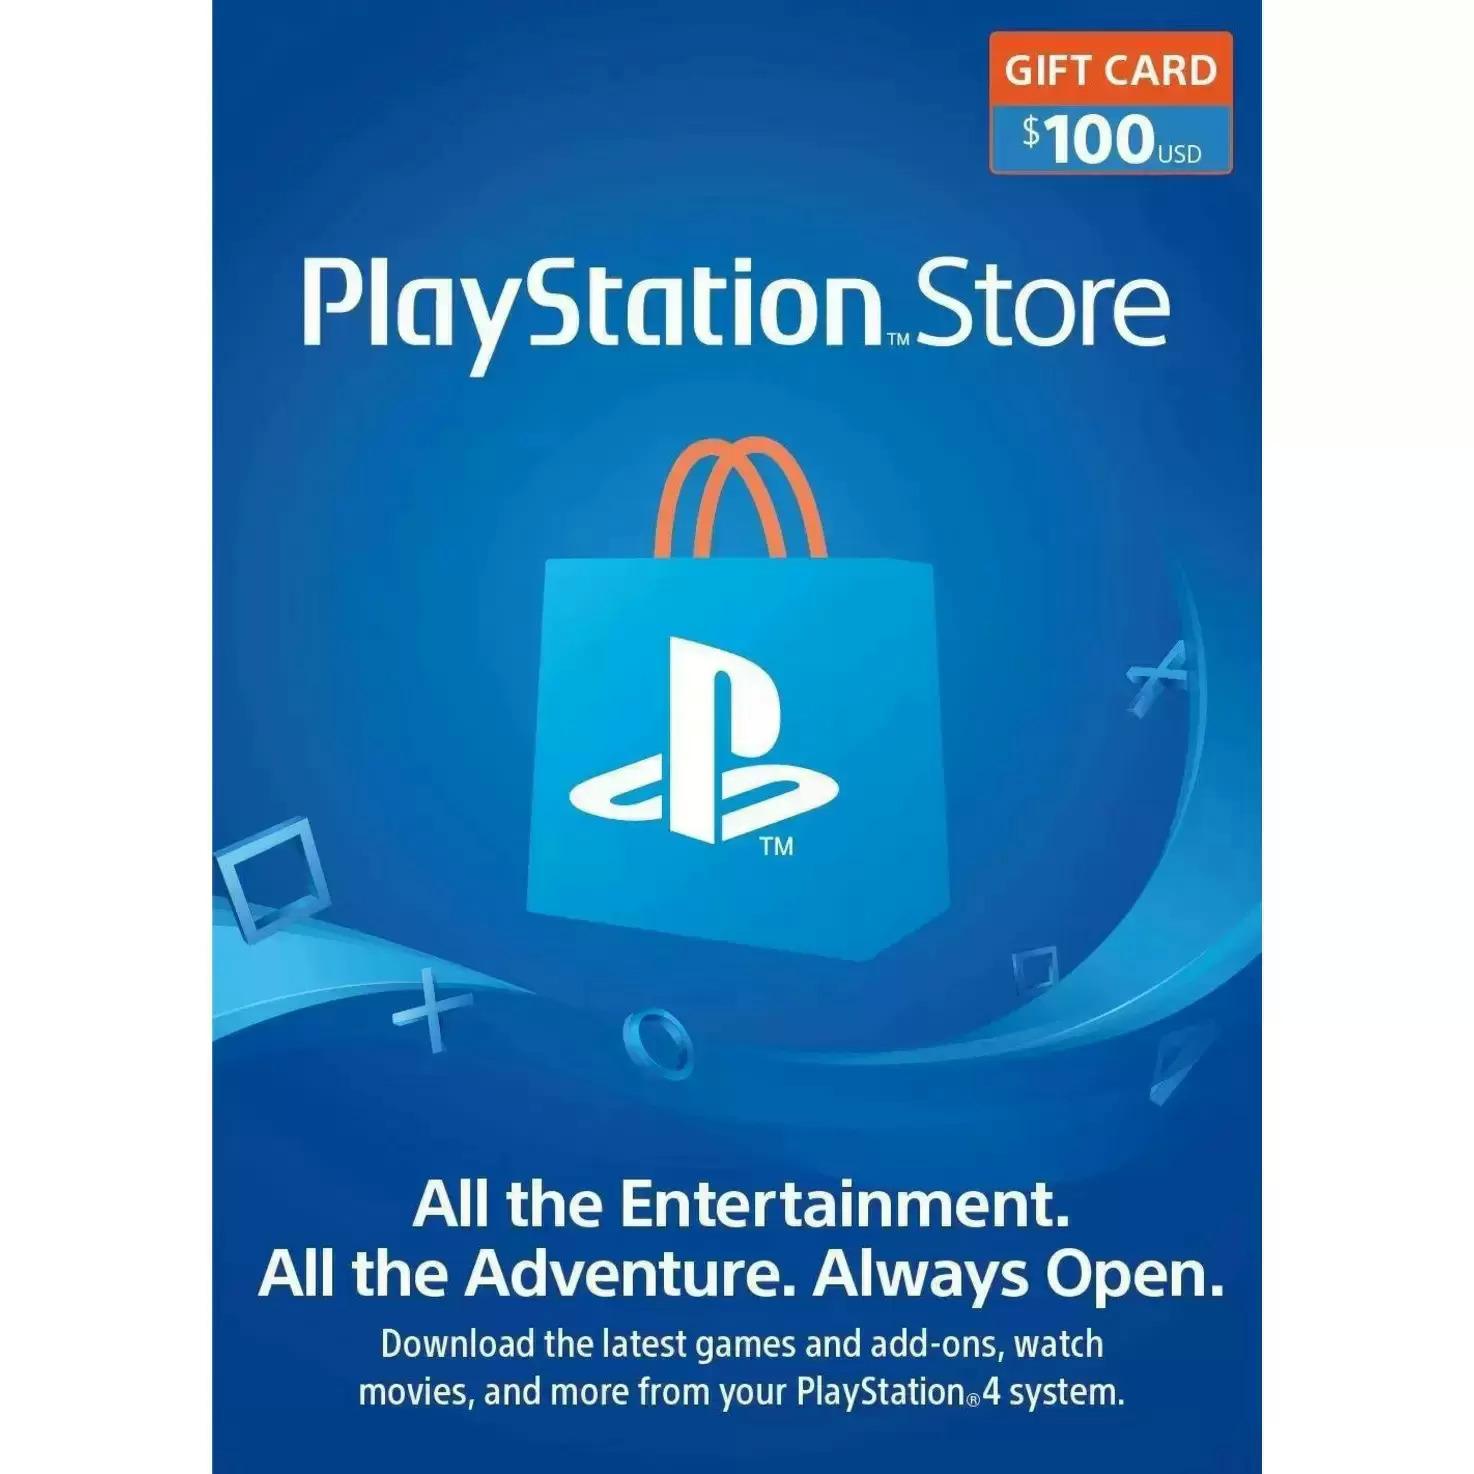 PlayStation Store eGift Card for 13.8% Off